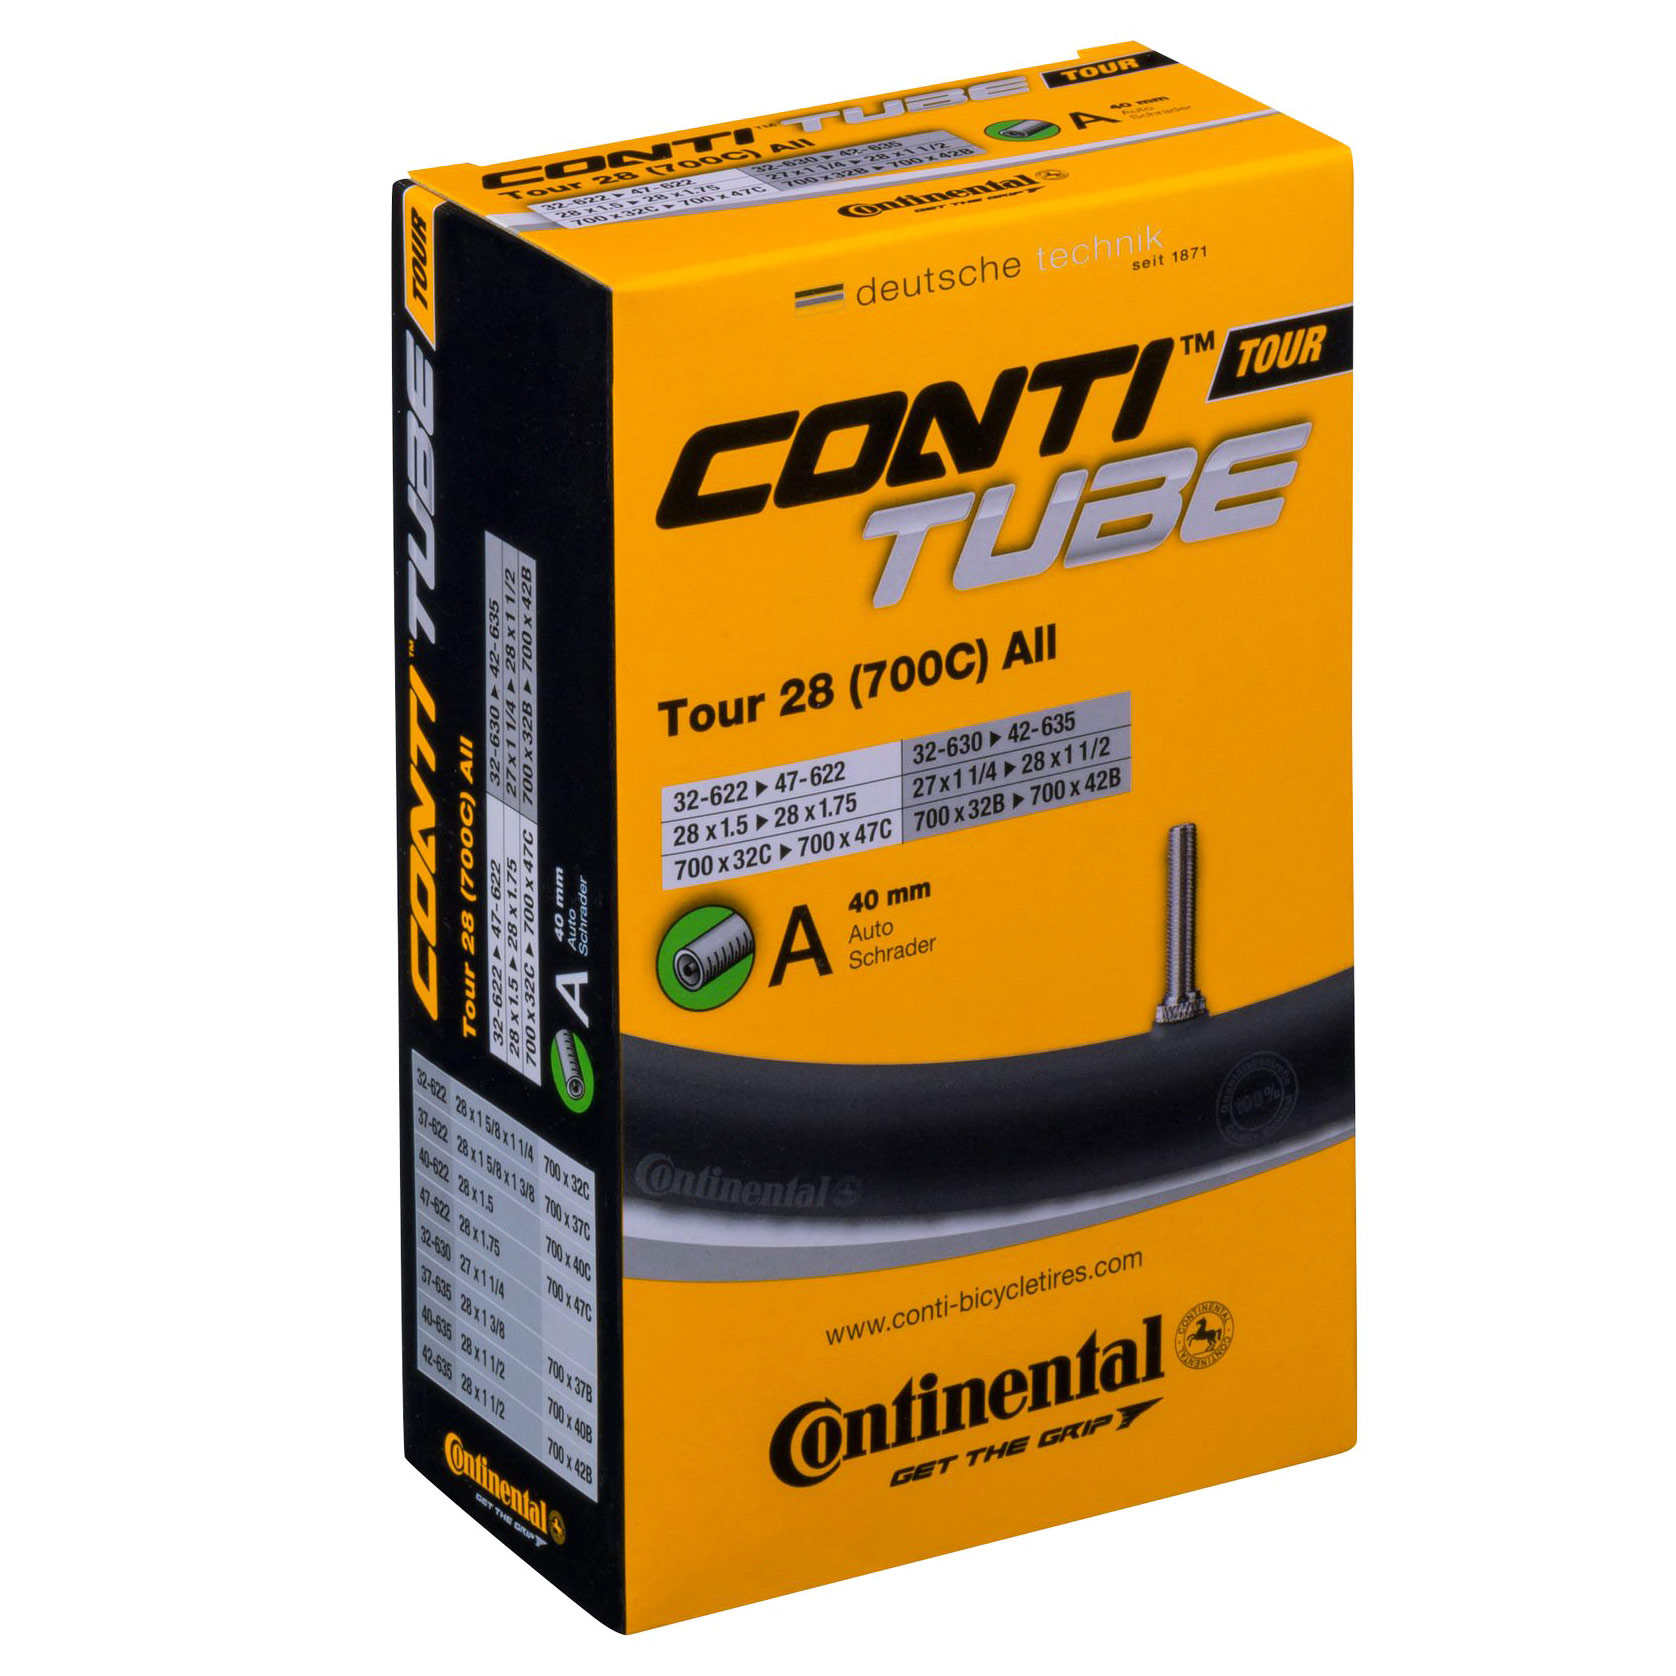 Picture of Continental Tour 28 All Tube